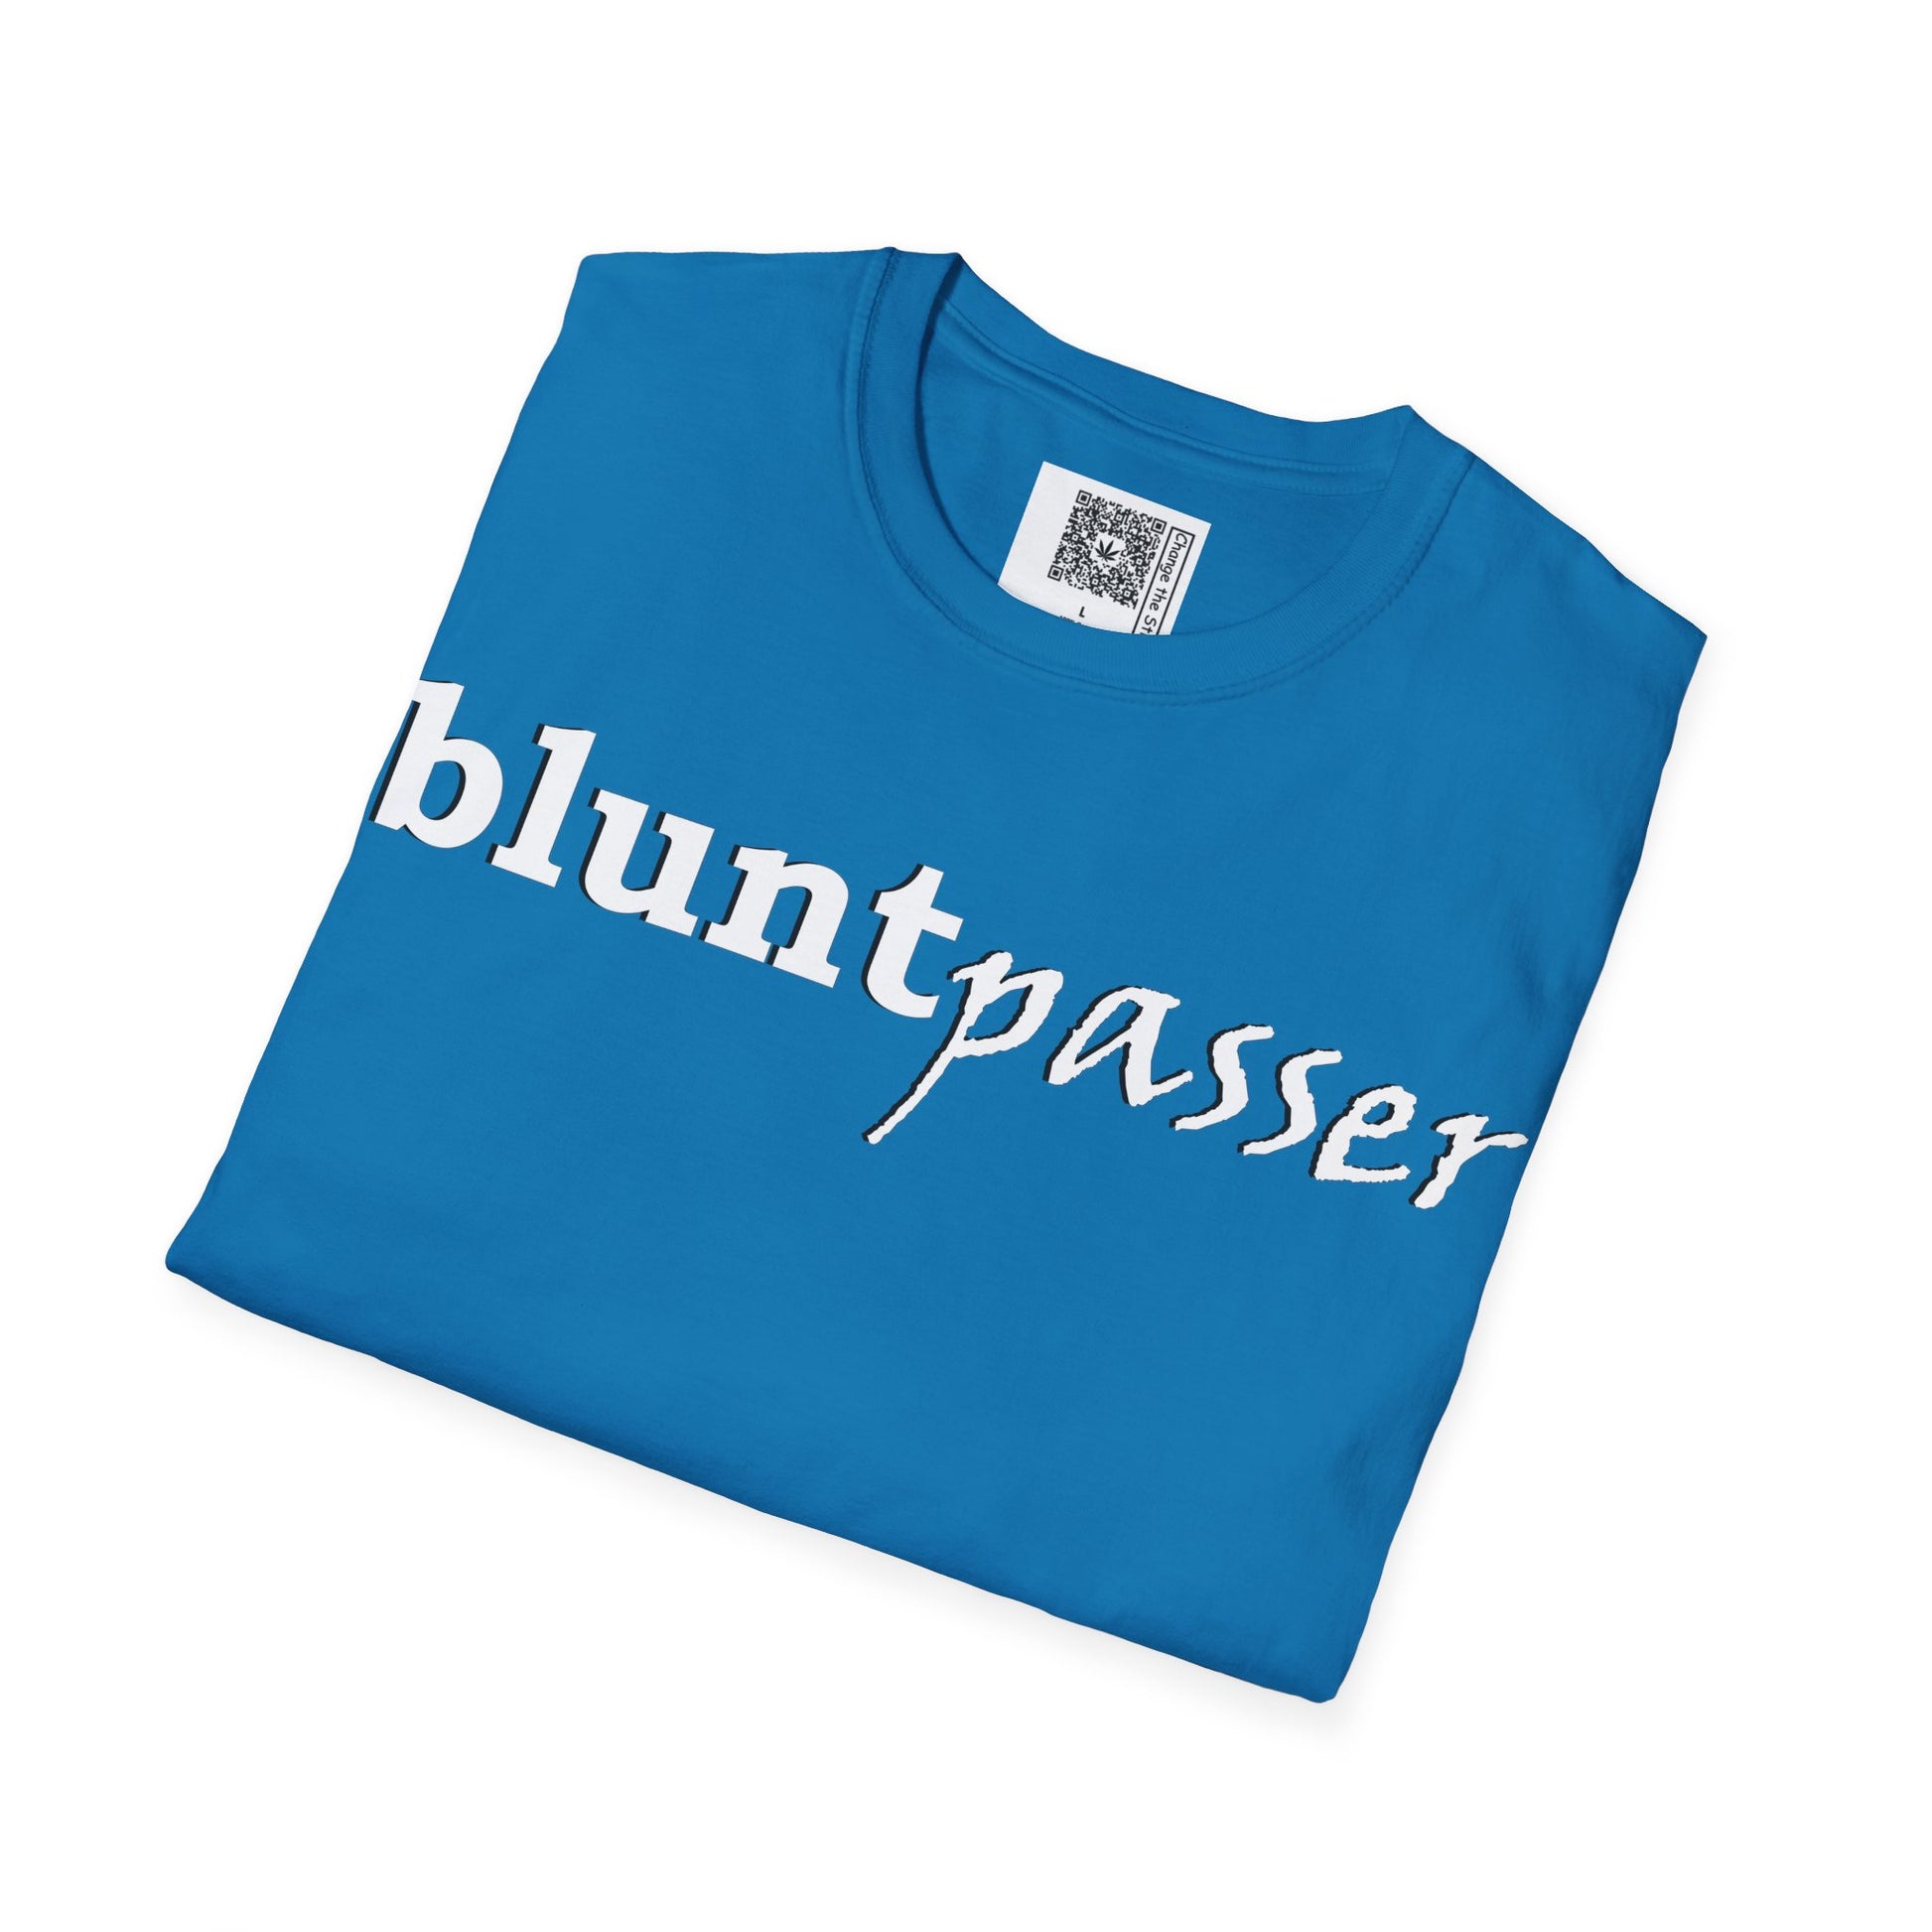 Change the Stigma, Sapphire color, shirt saying "blunt passer", Folded, Qr code is shown